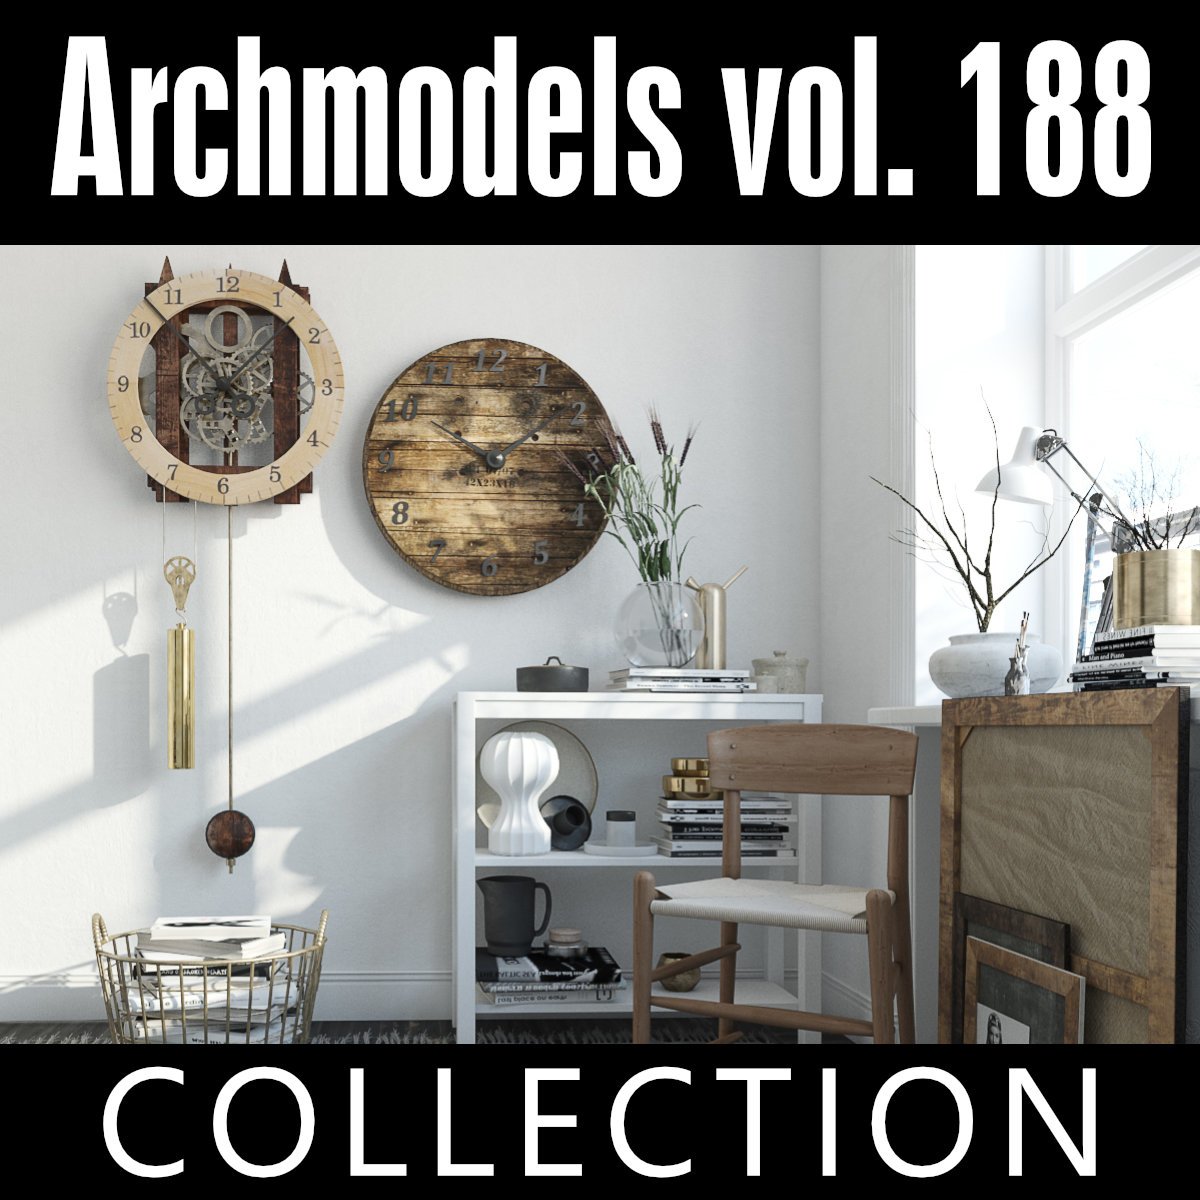 Evermotion Archmodels Vol. 188